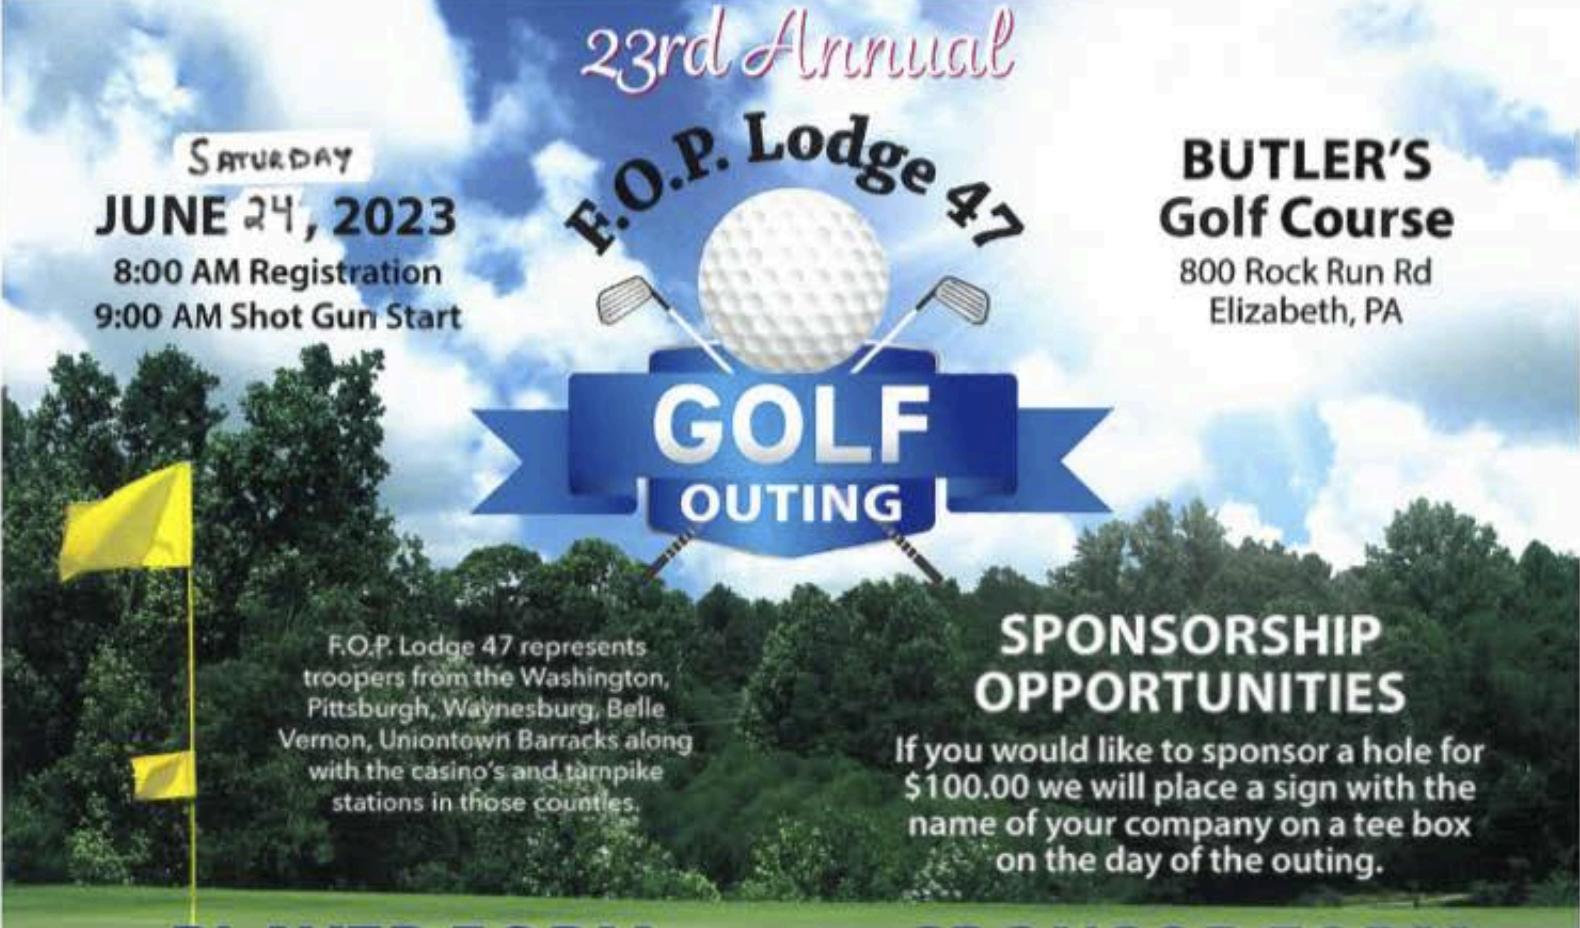 F.O.P. LODGE 47 - 23RD ANNUAL OUTING